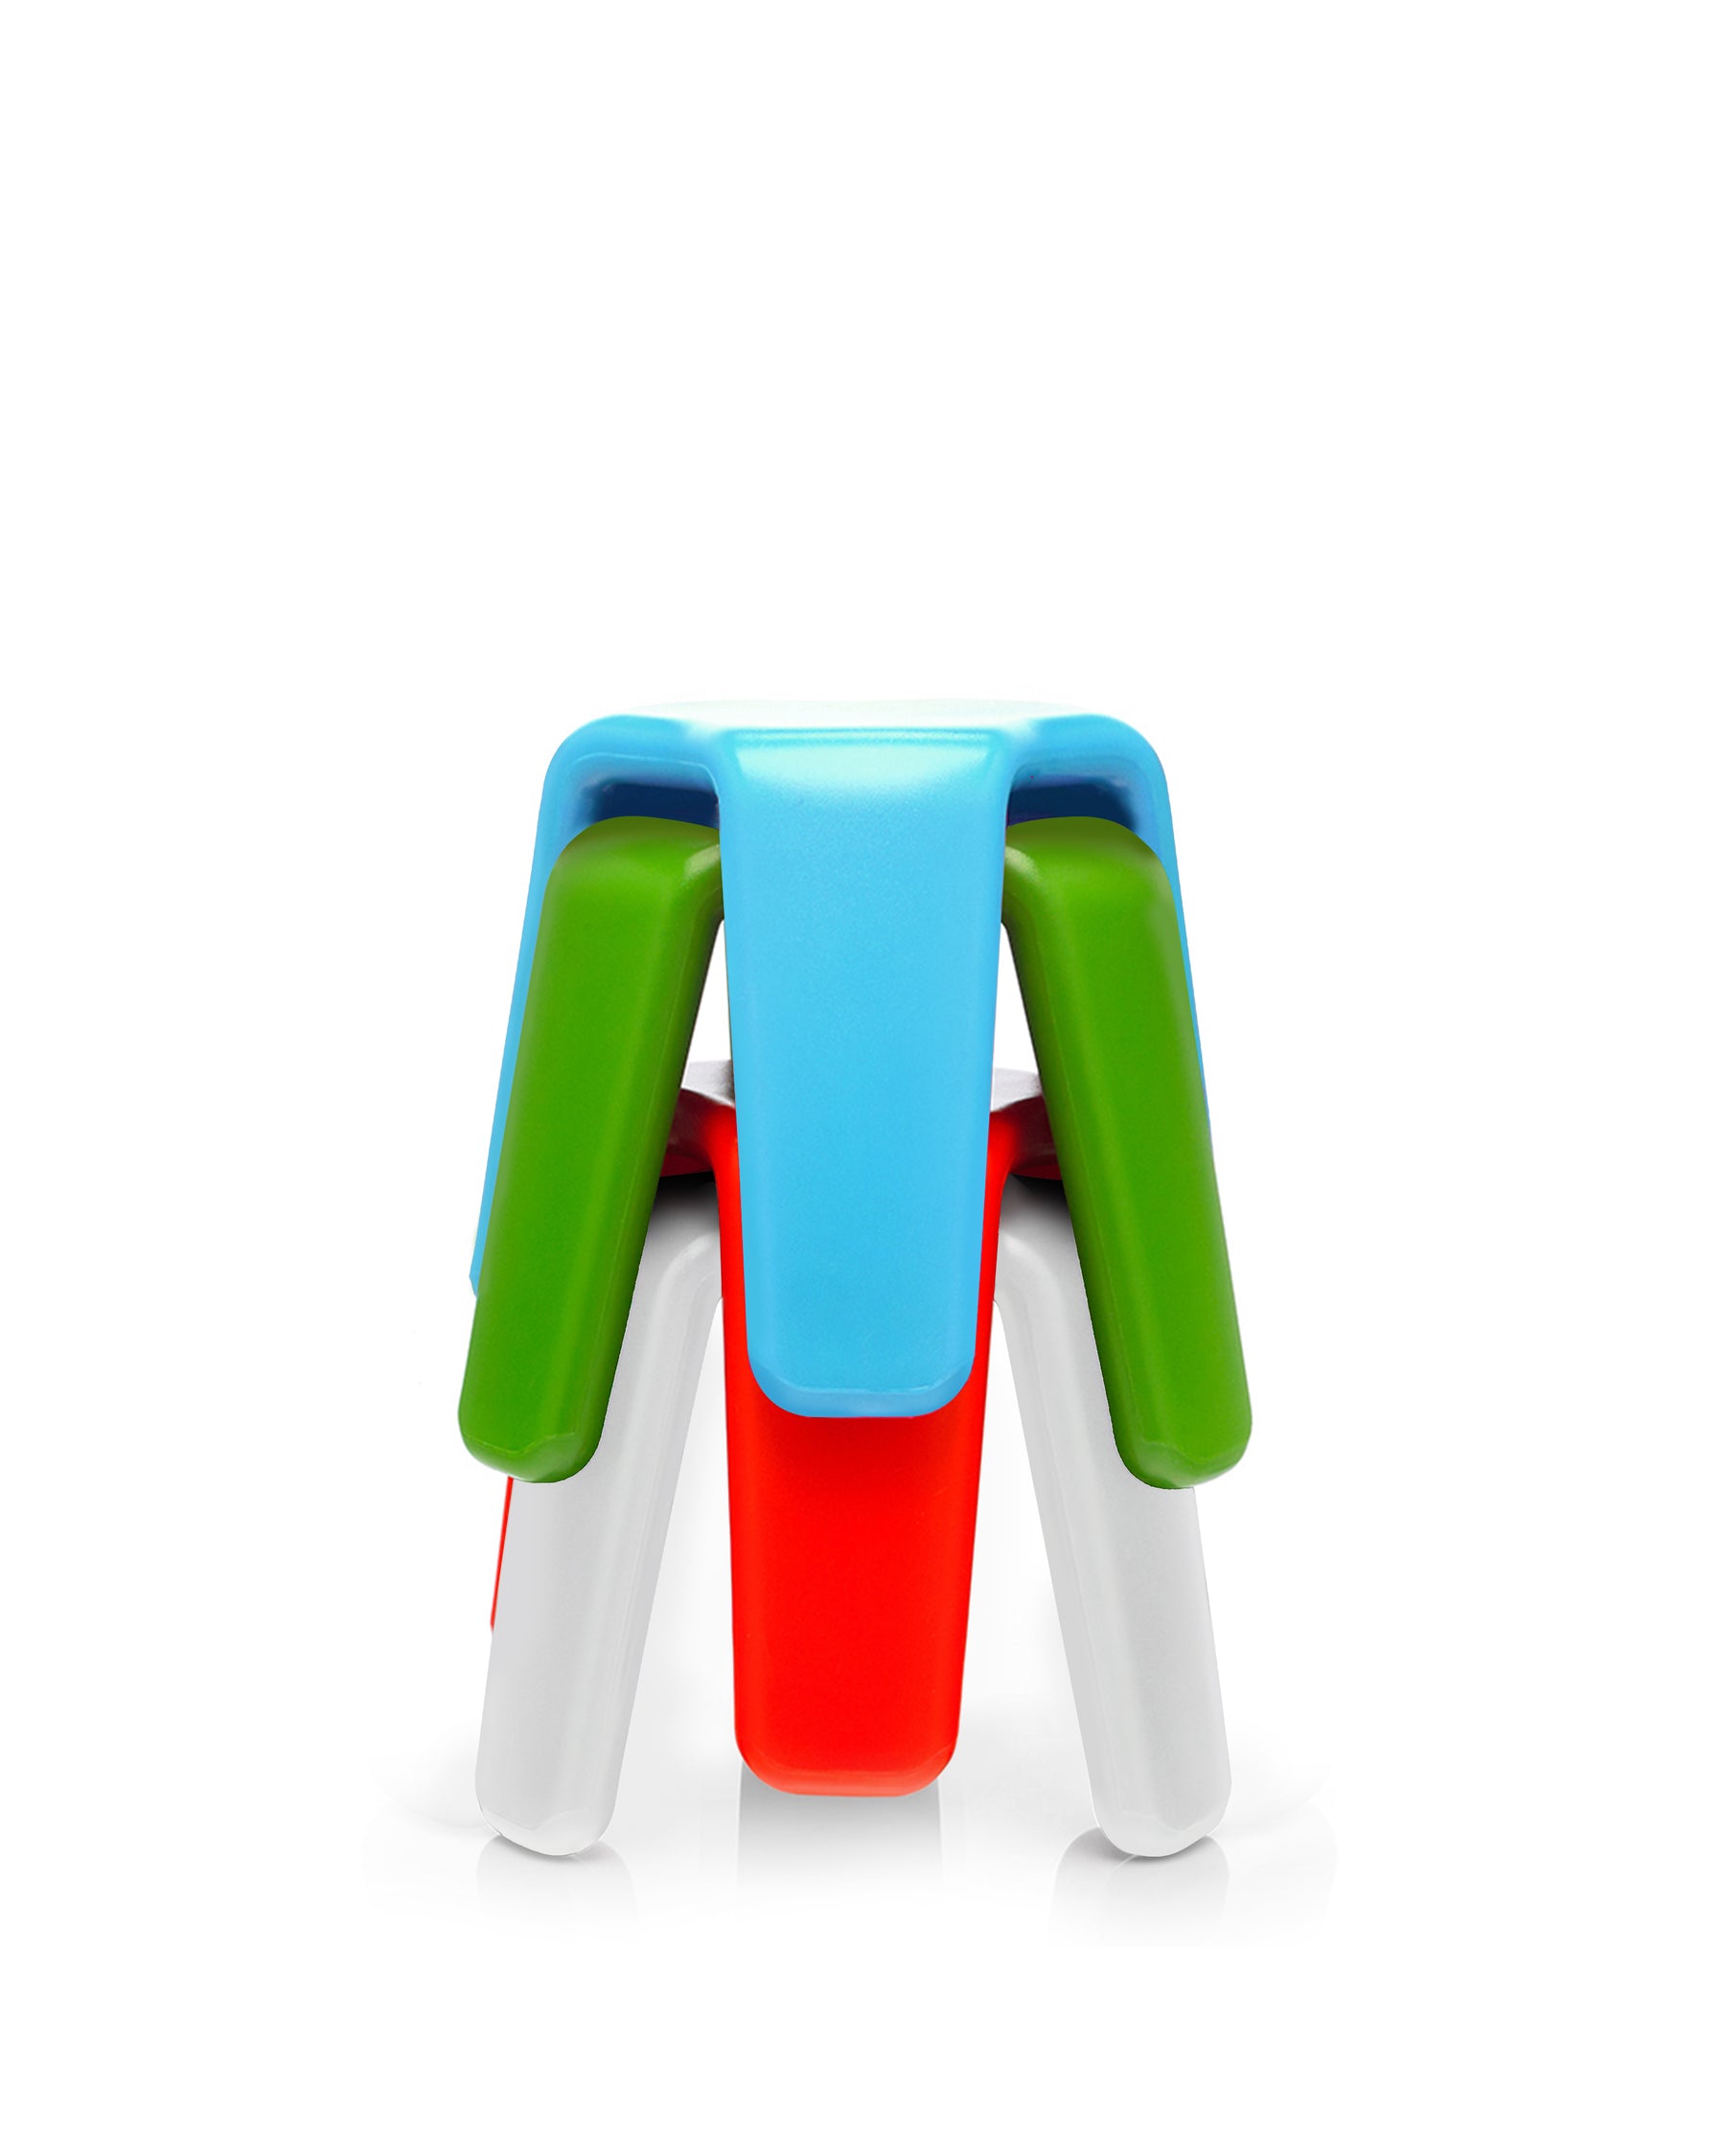  Stackable, indestructible, and UV resistant the stools offer a stylish, modern design to complement any residential or childcare environment.  Rotationally molded recyclable polyethylene stool.